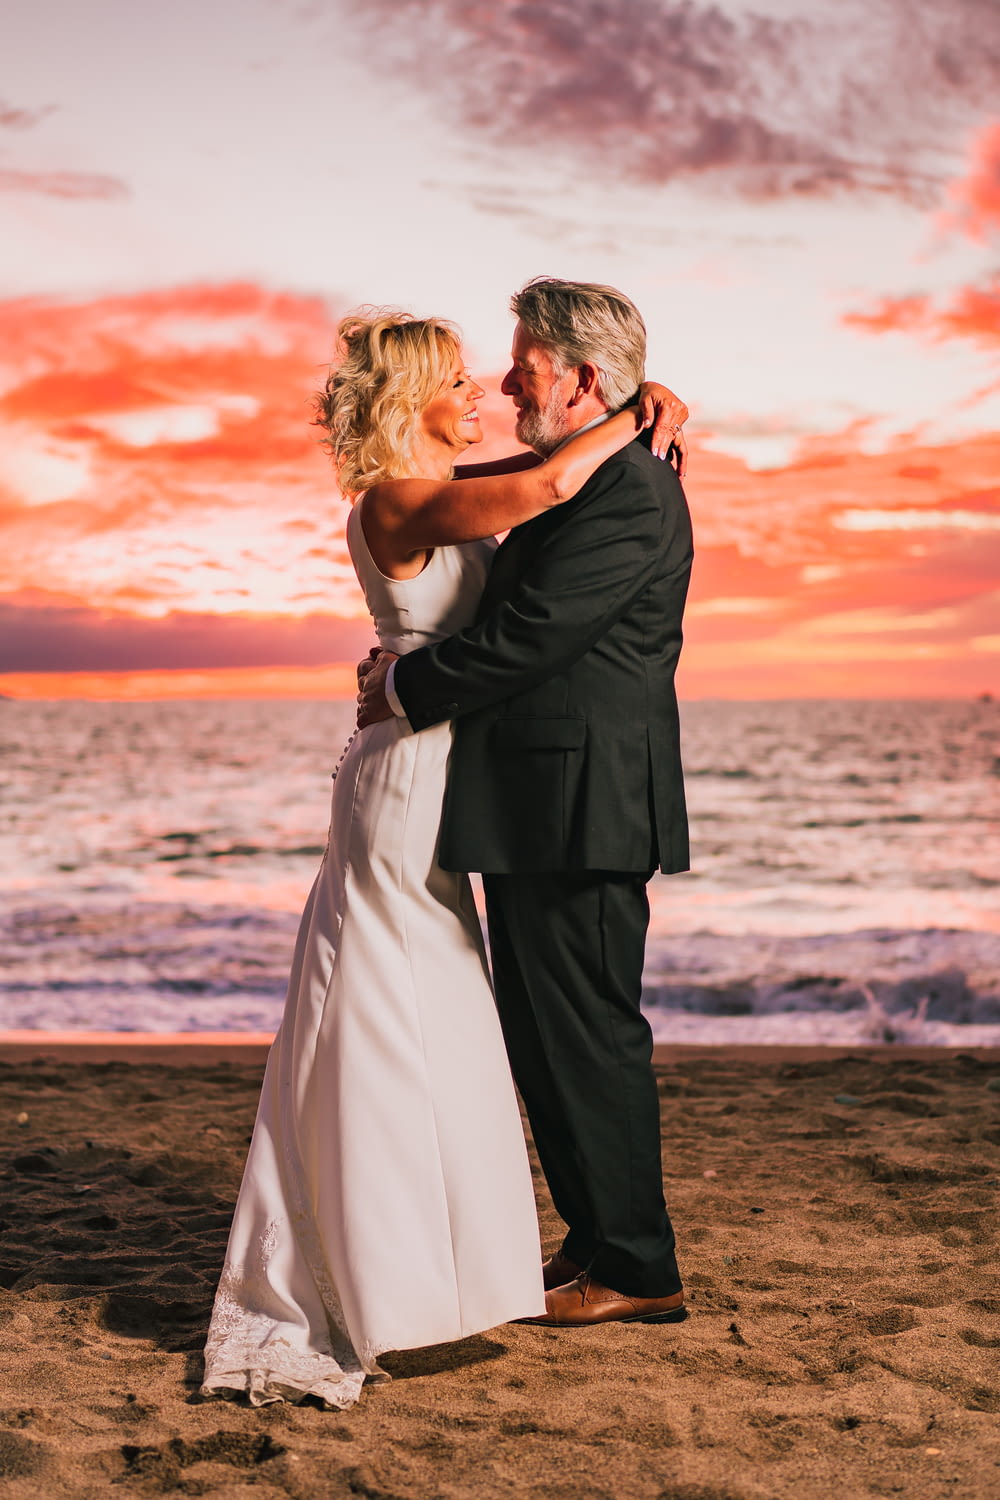 a bride and groom embracing on the beach at sunset